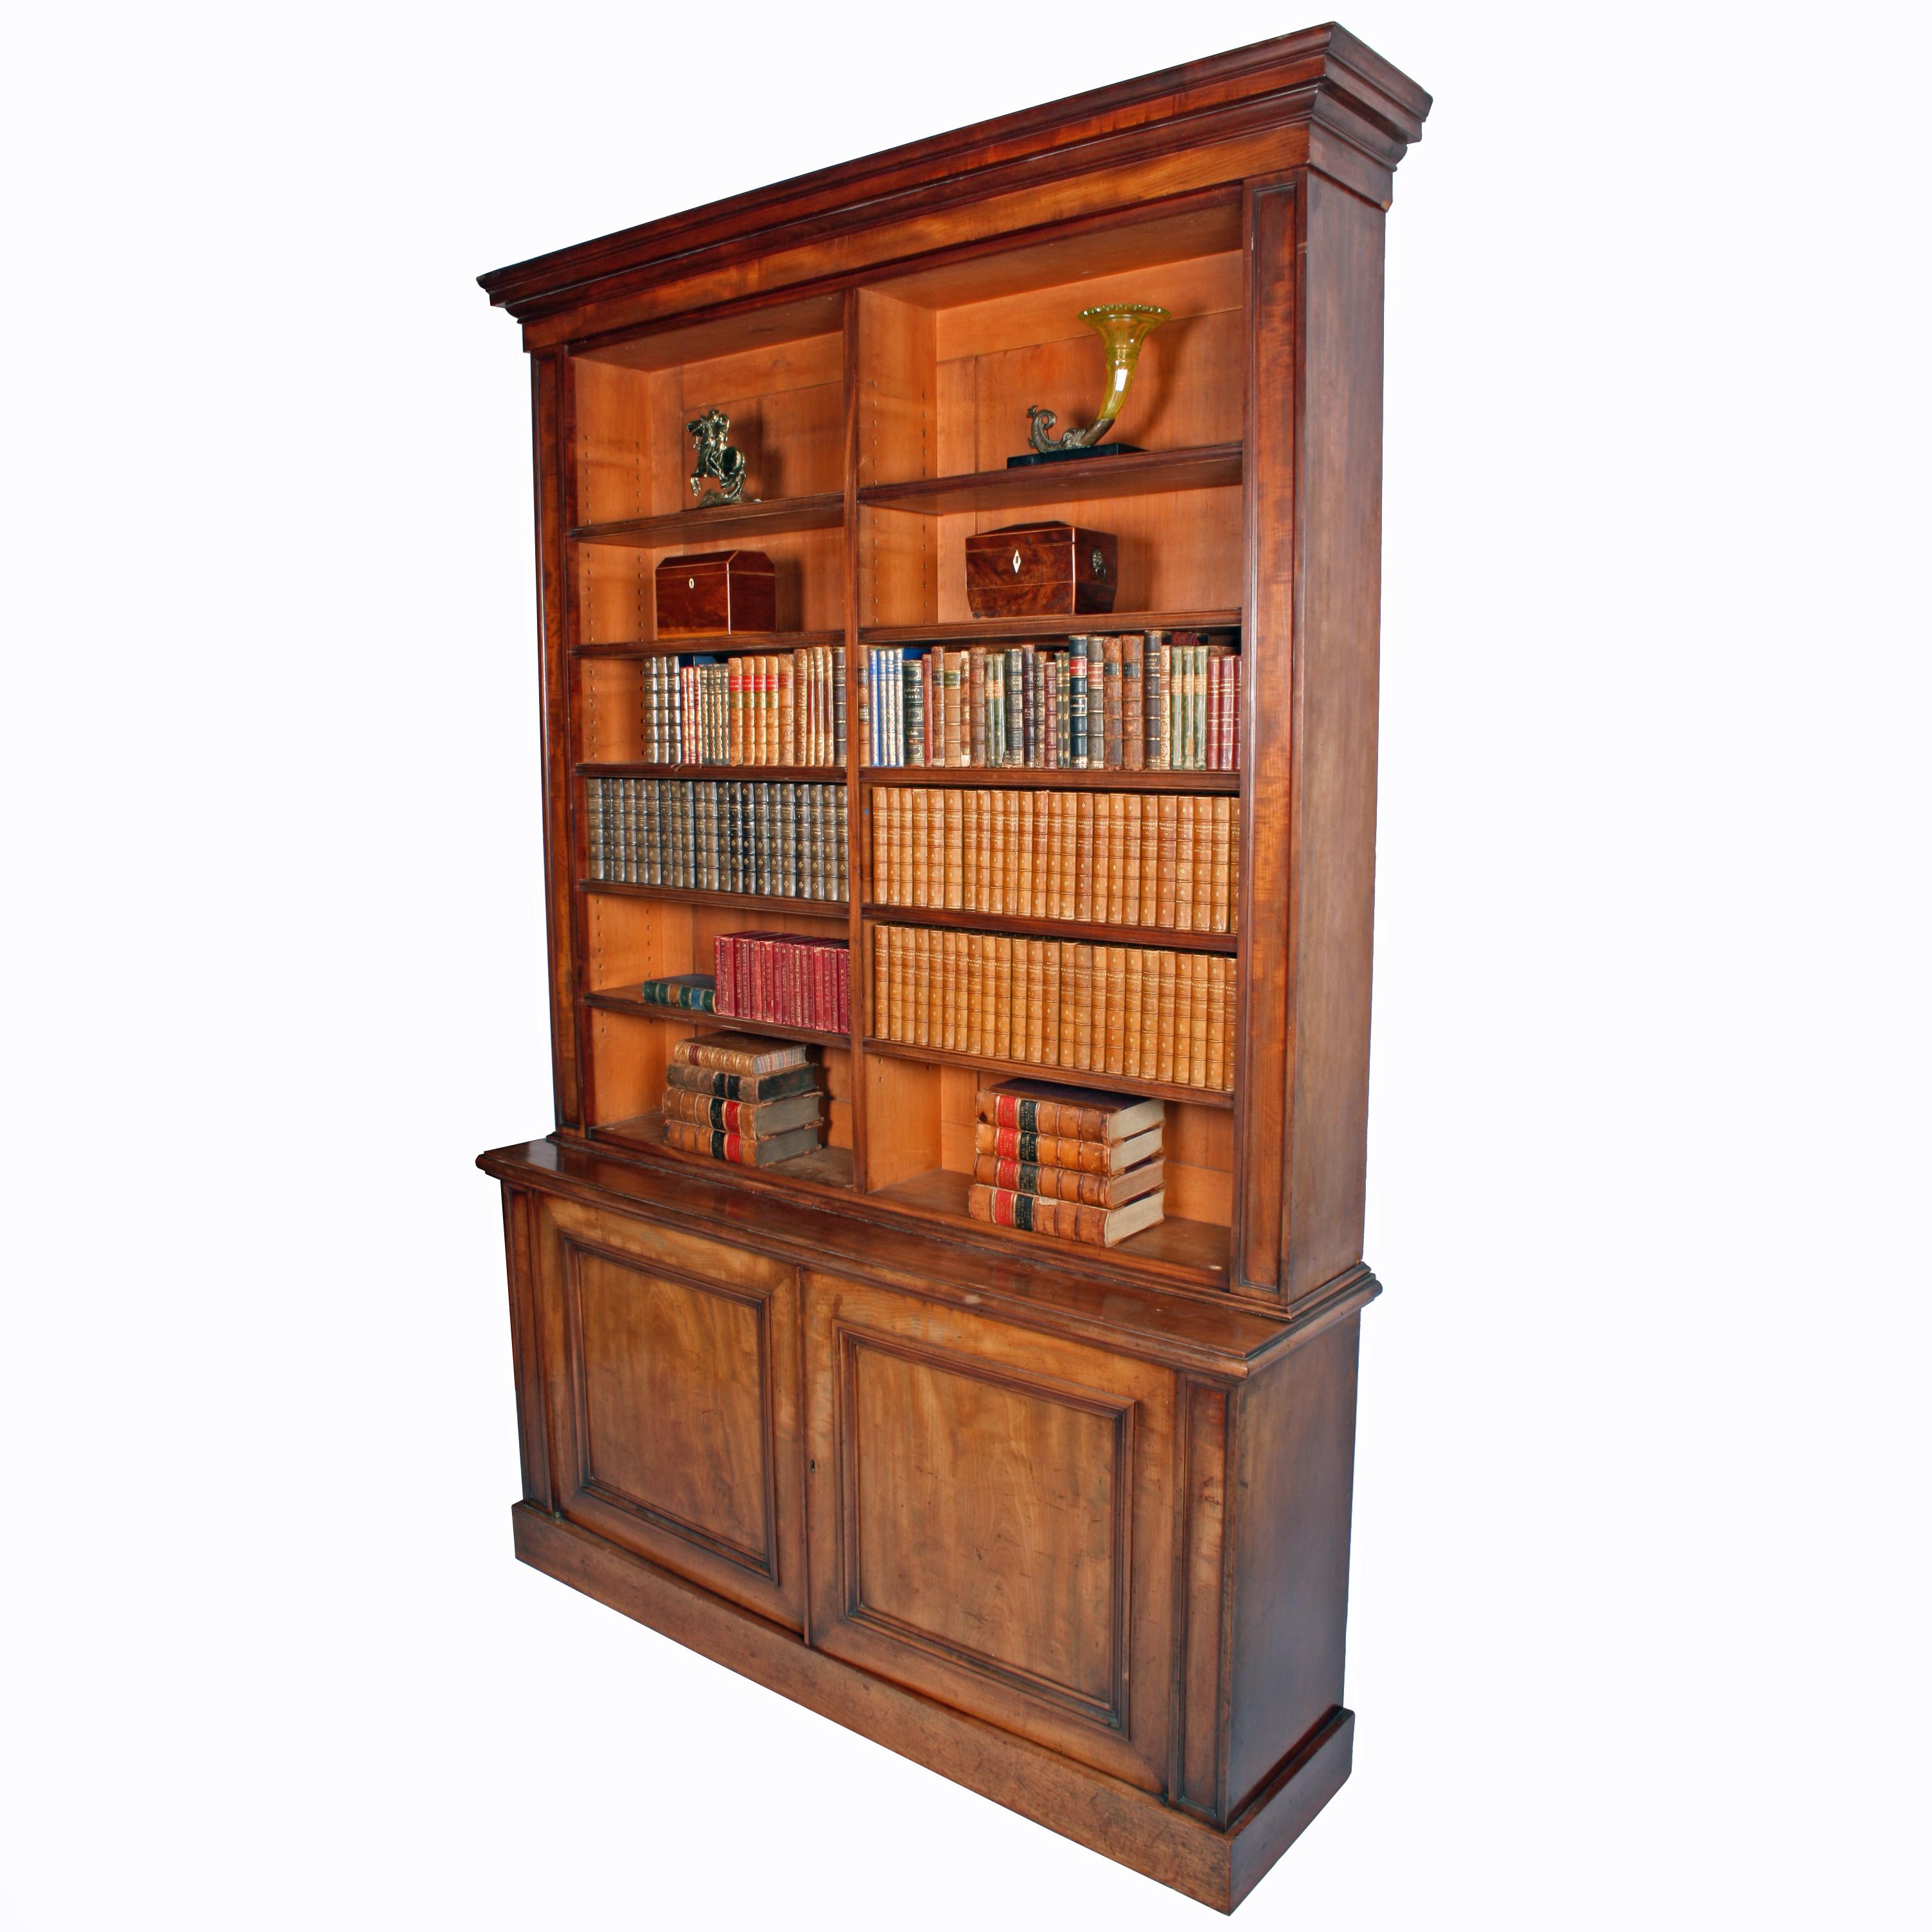 Mahogany library bookcase


A mid-19th century mahogany library bookcase.

The bookcase has an open shelf top and a two-door cupboard base. The bookcase top is divided down the centre and has ten adjustable shelves which have a concave and reeded